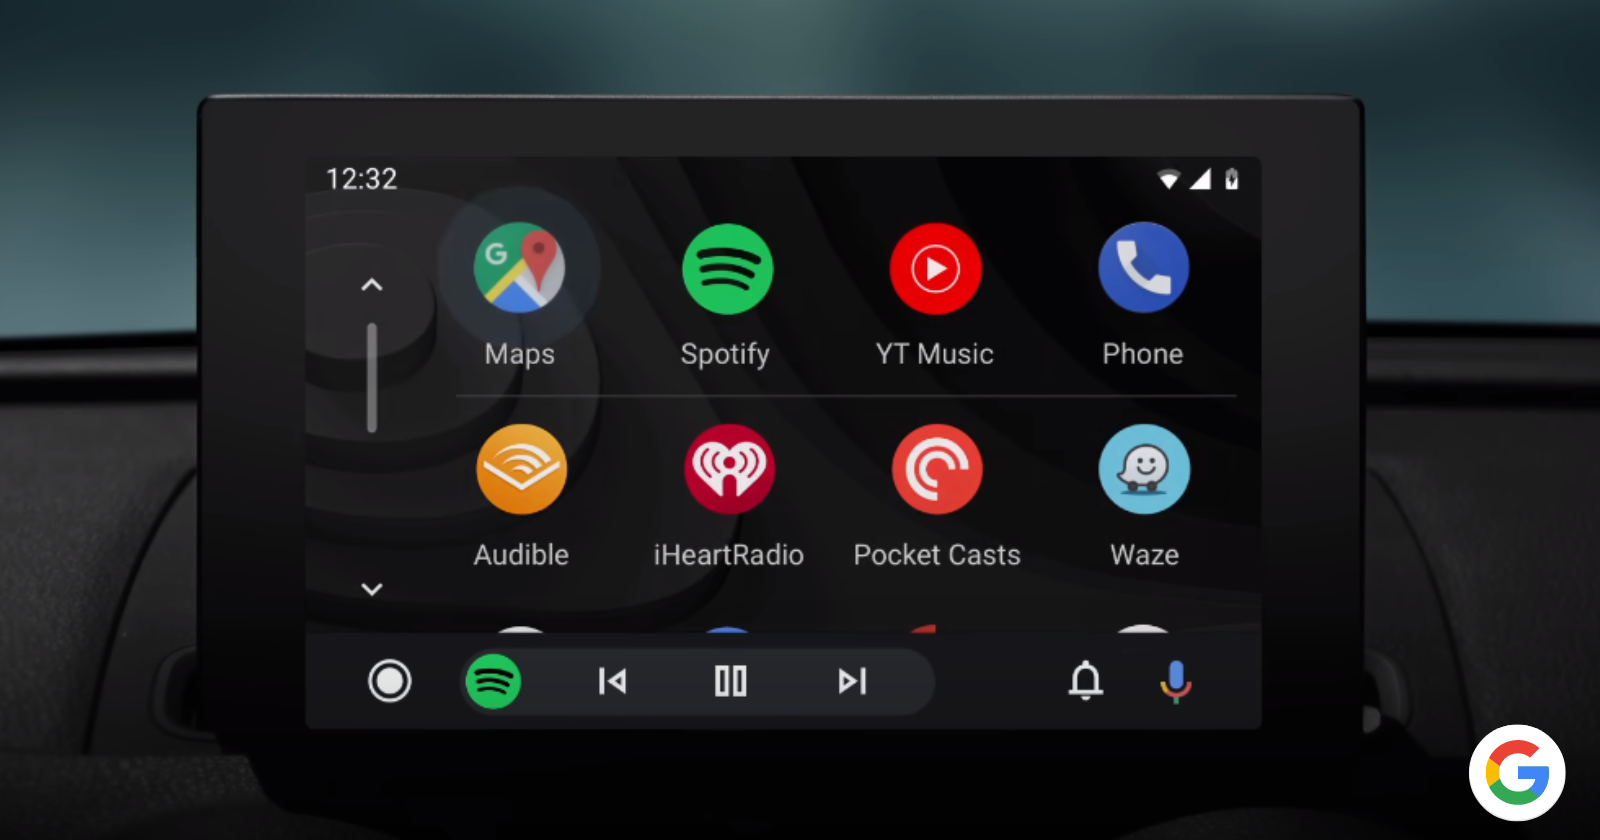 Android Auto highlights apps restricted to parked use